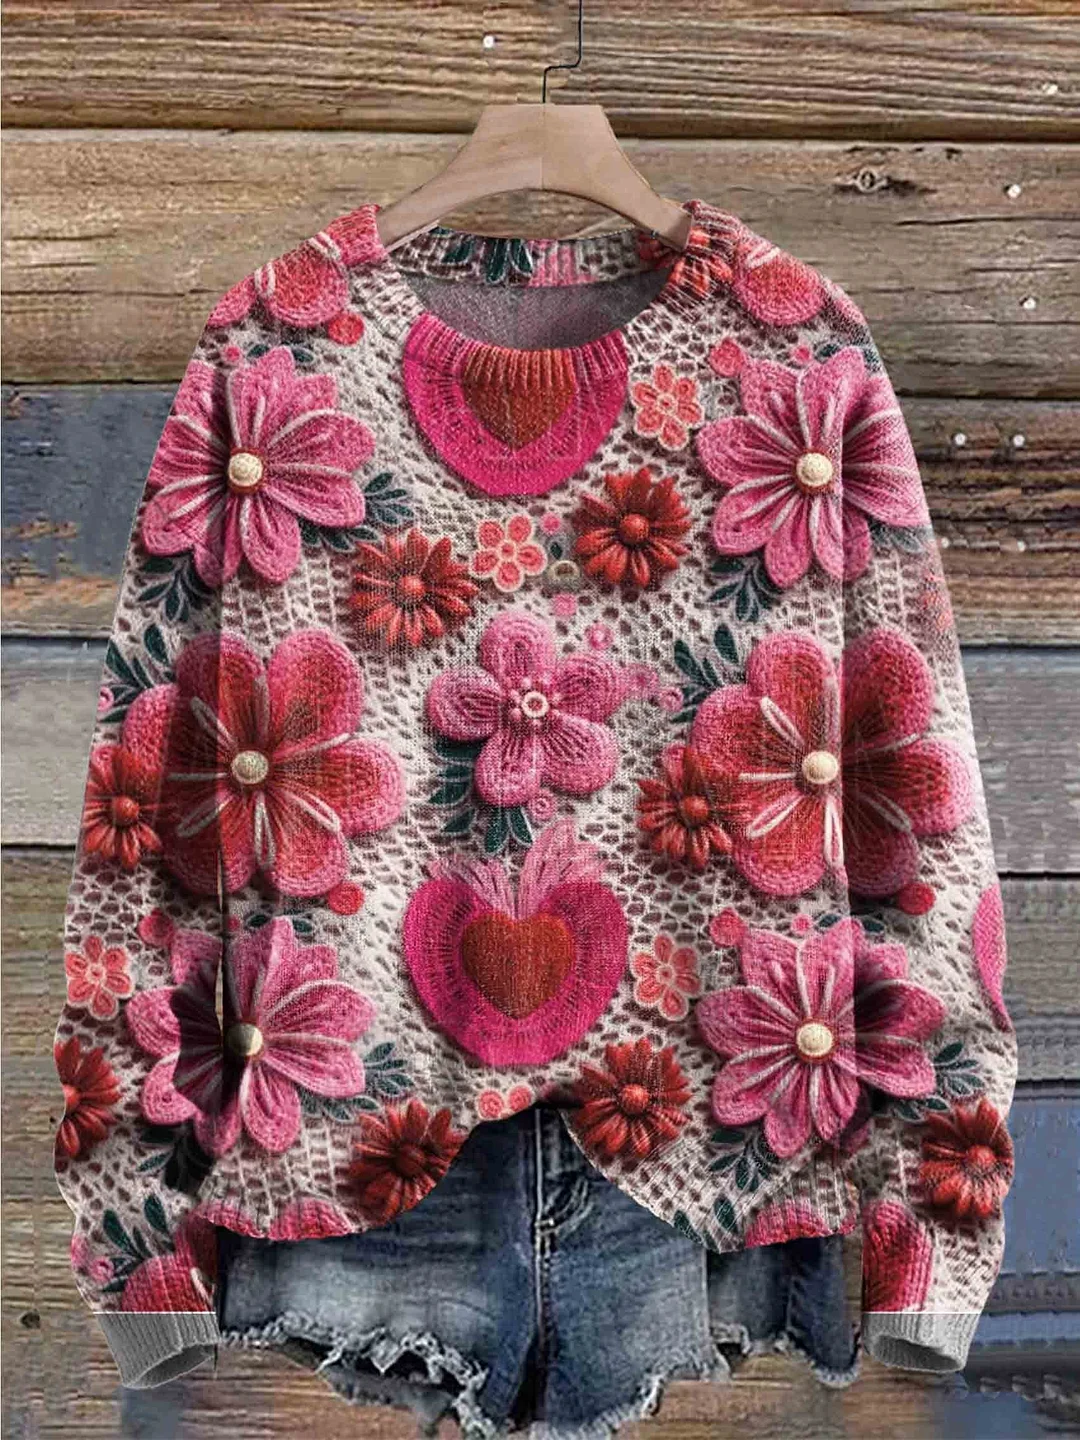 Valentine's Day Hot Pink And Red Embroidered And Crochet Floral Seamless Repeat Pattern Crew Neck Printed Sweater